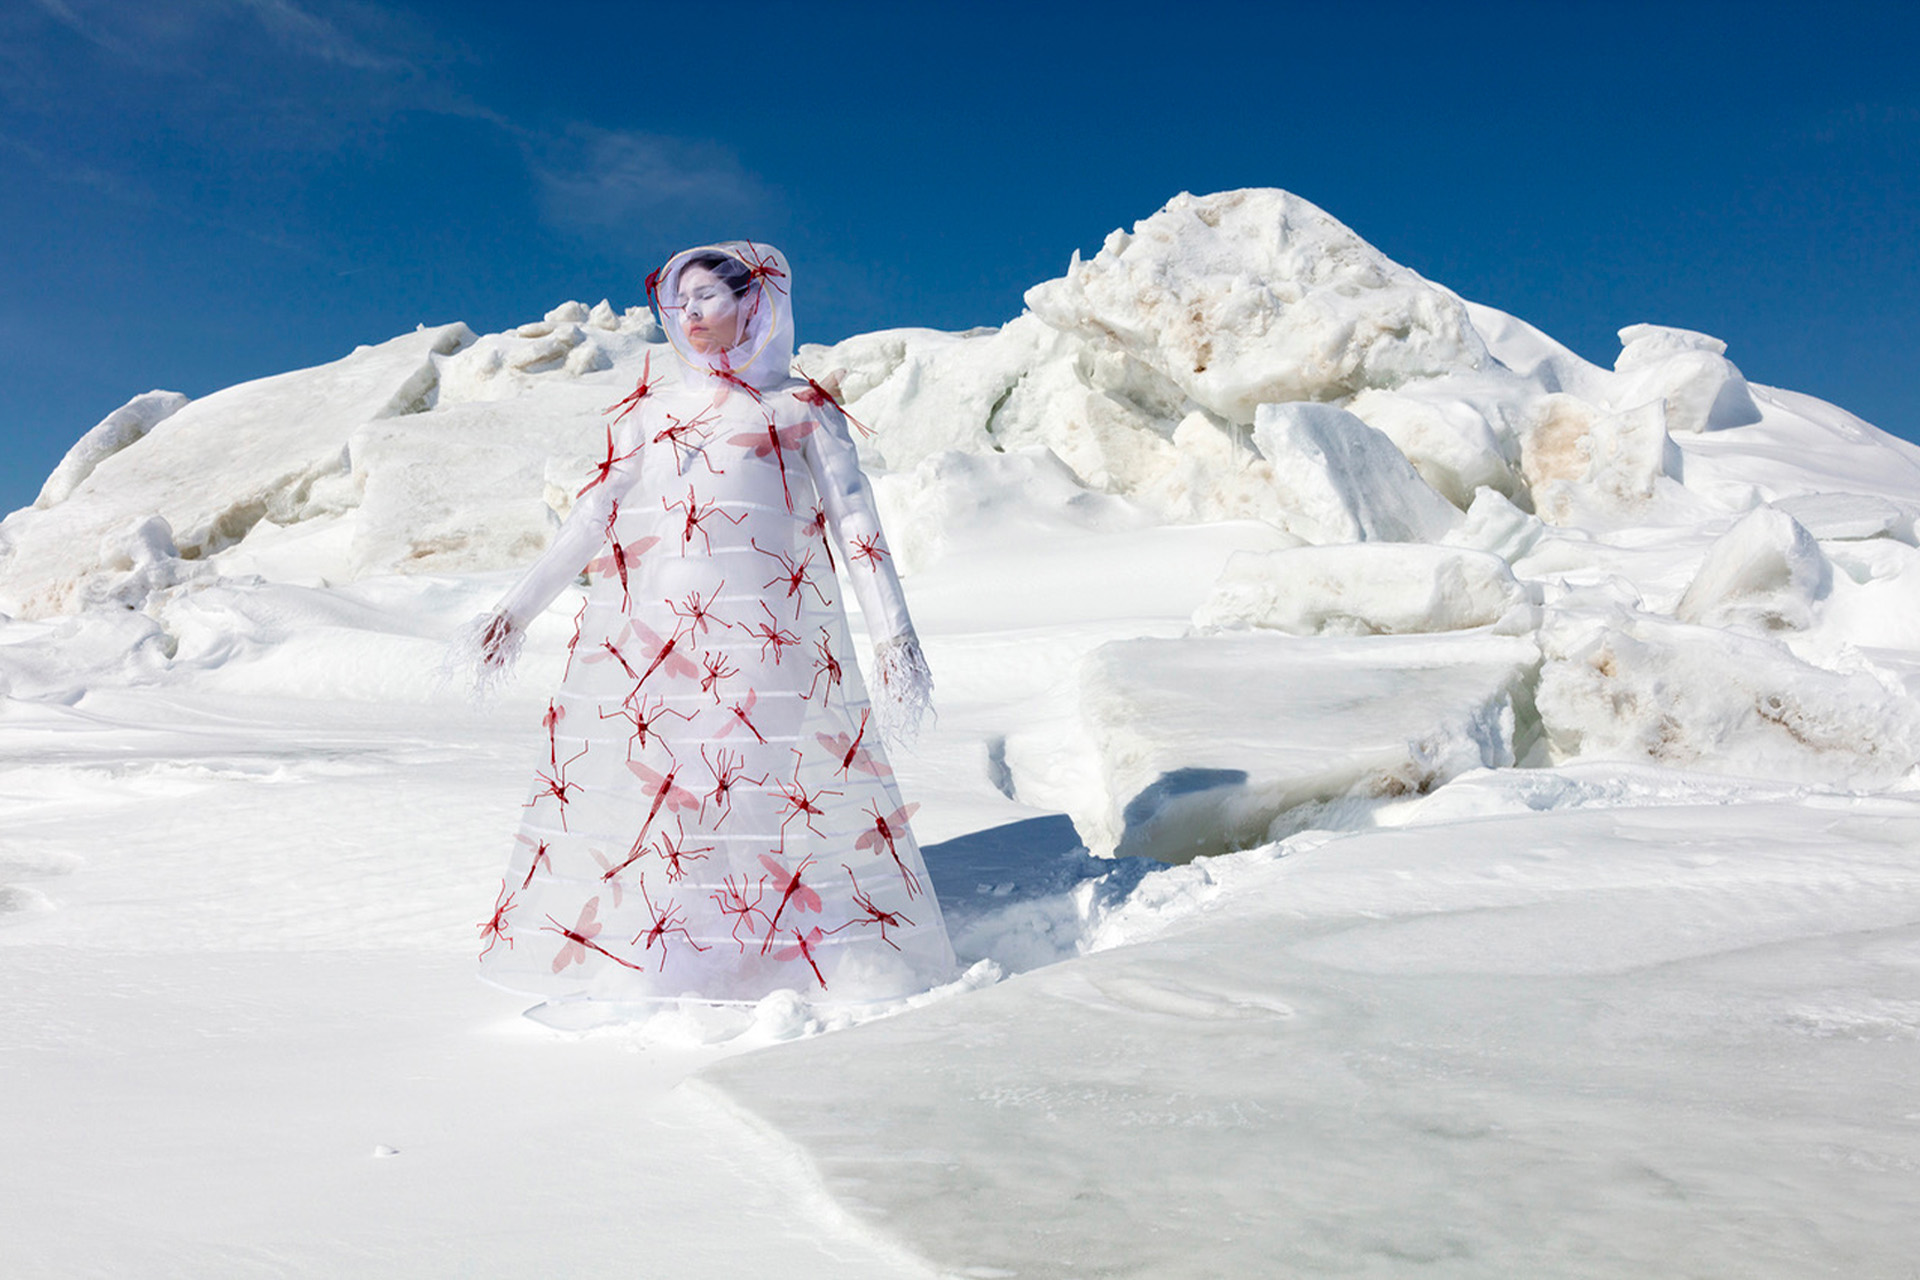 A woman in a white and red dress standing in the snow.